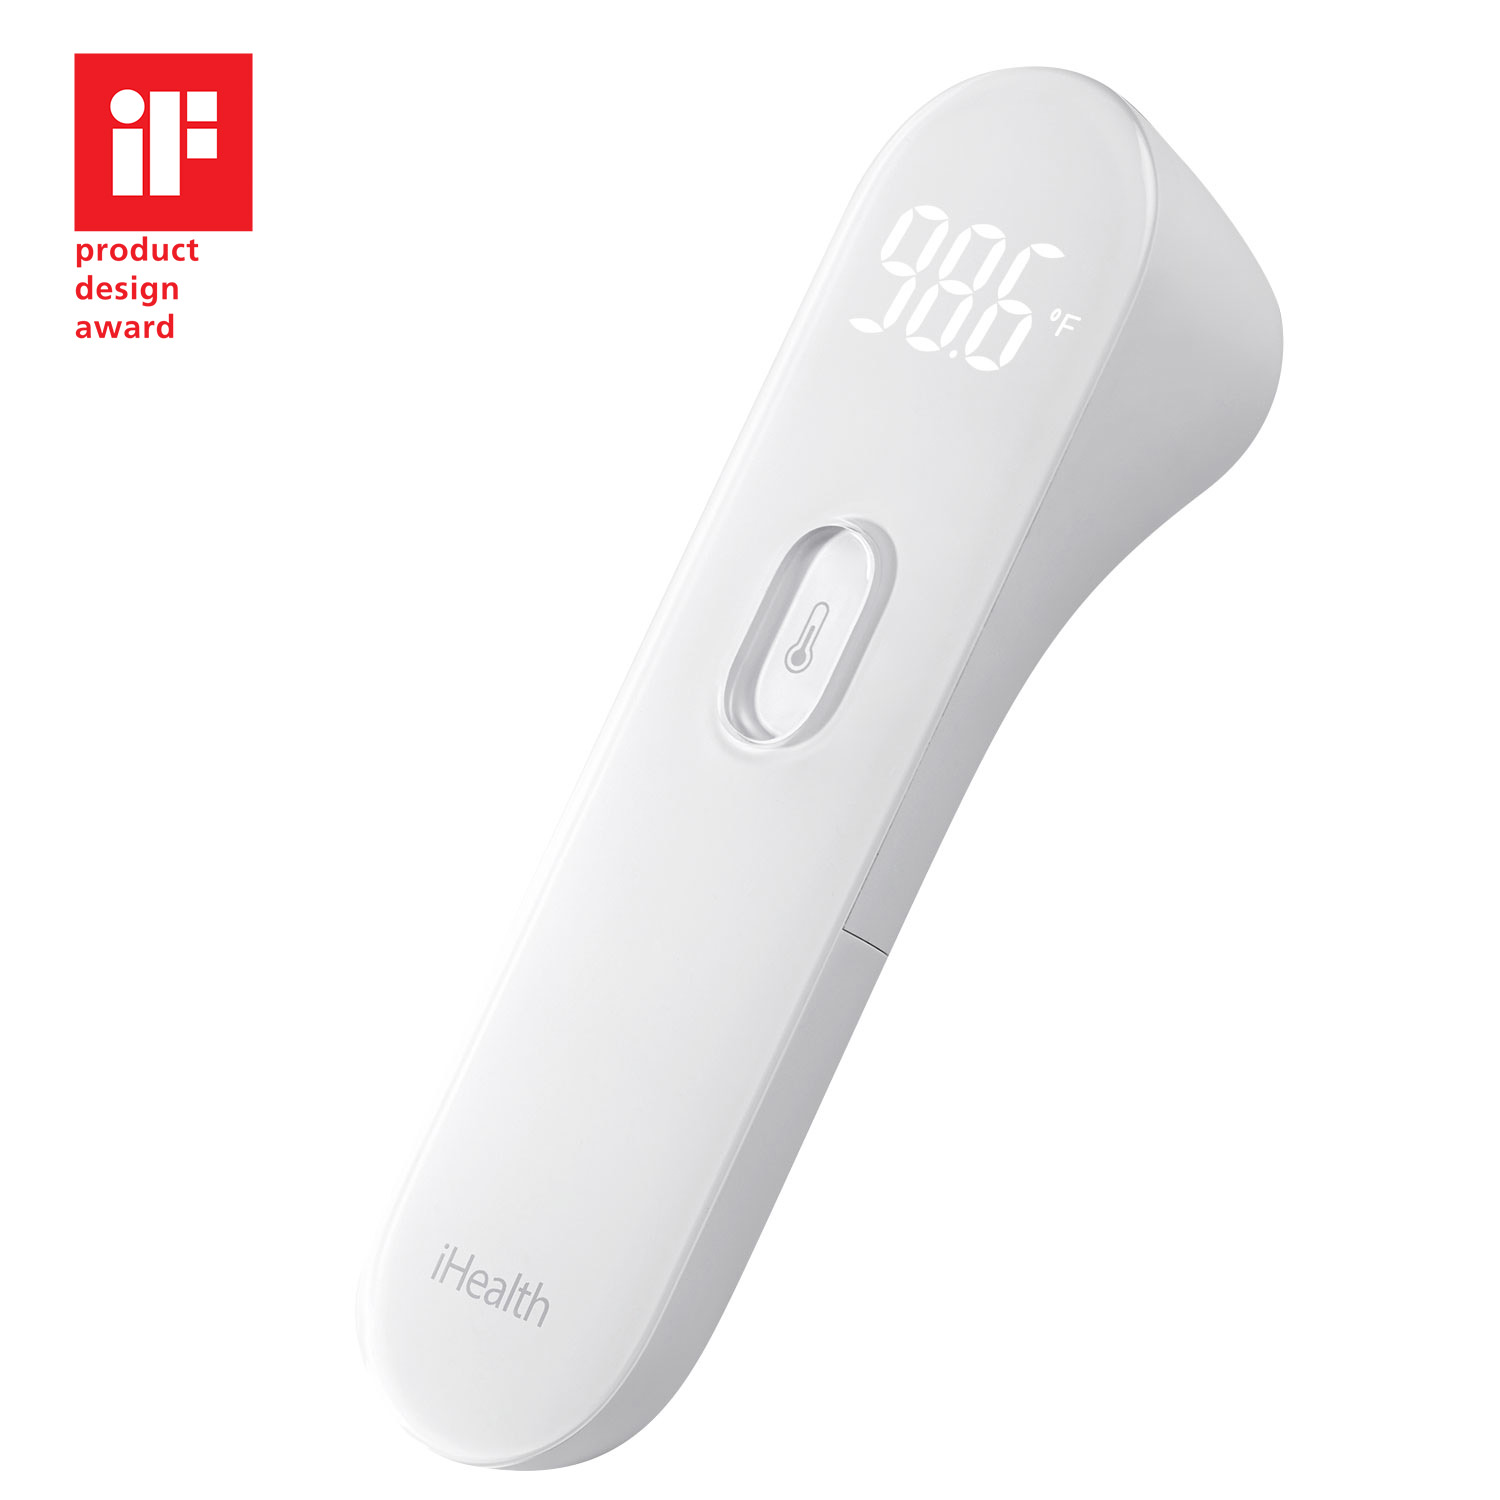 iHealth Thermometer PT3 is an infrared No-Touch forehead thermometer that gives you 1-second testing